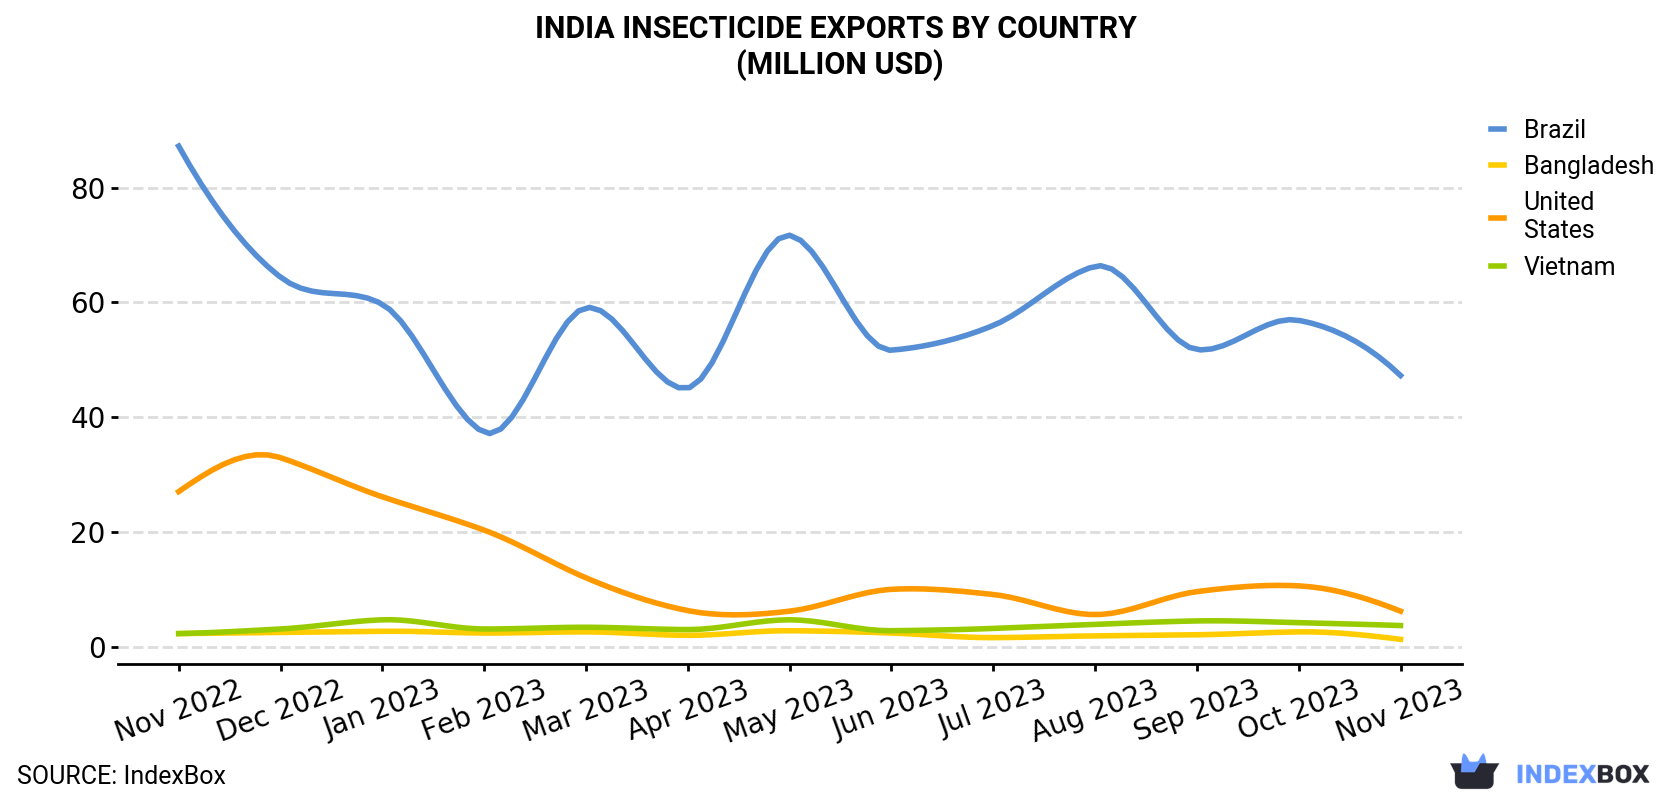 India Insecticide Exports By Country (Million USD)